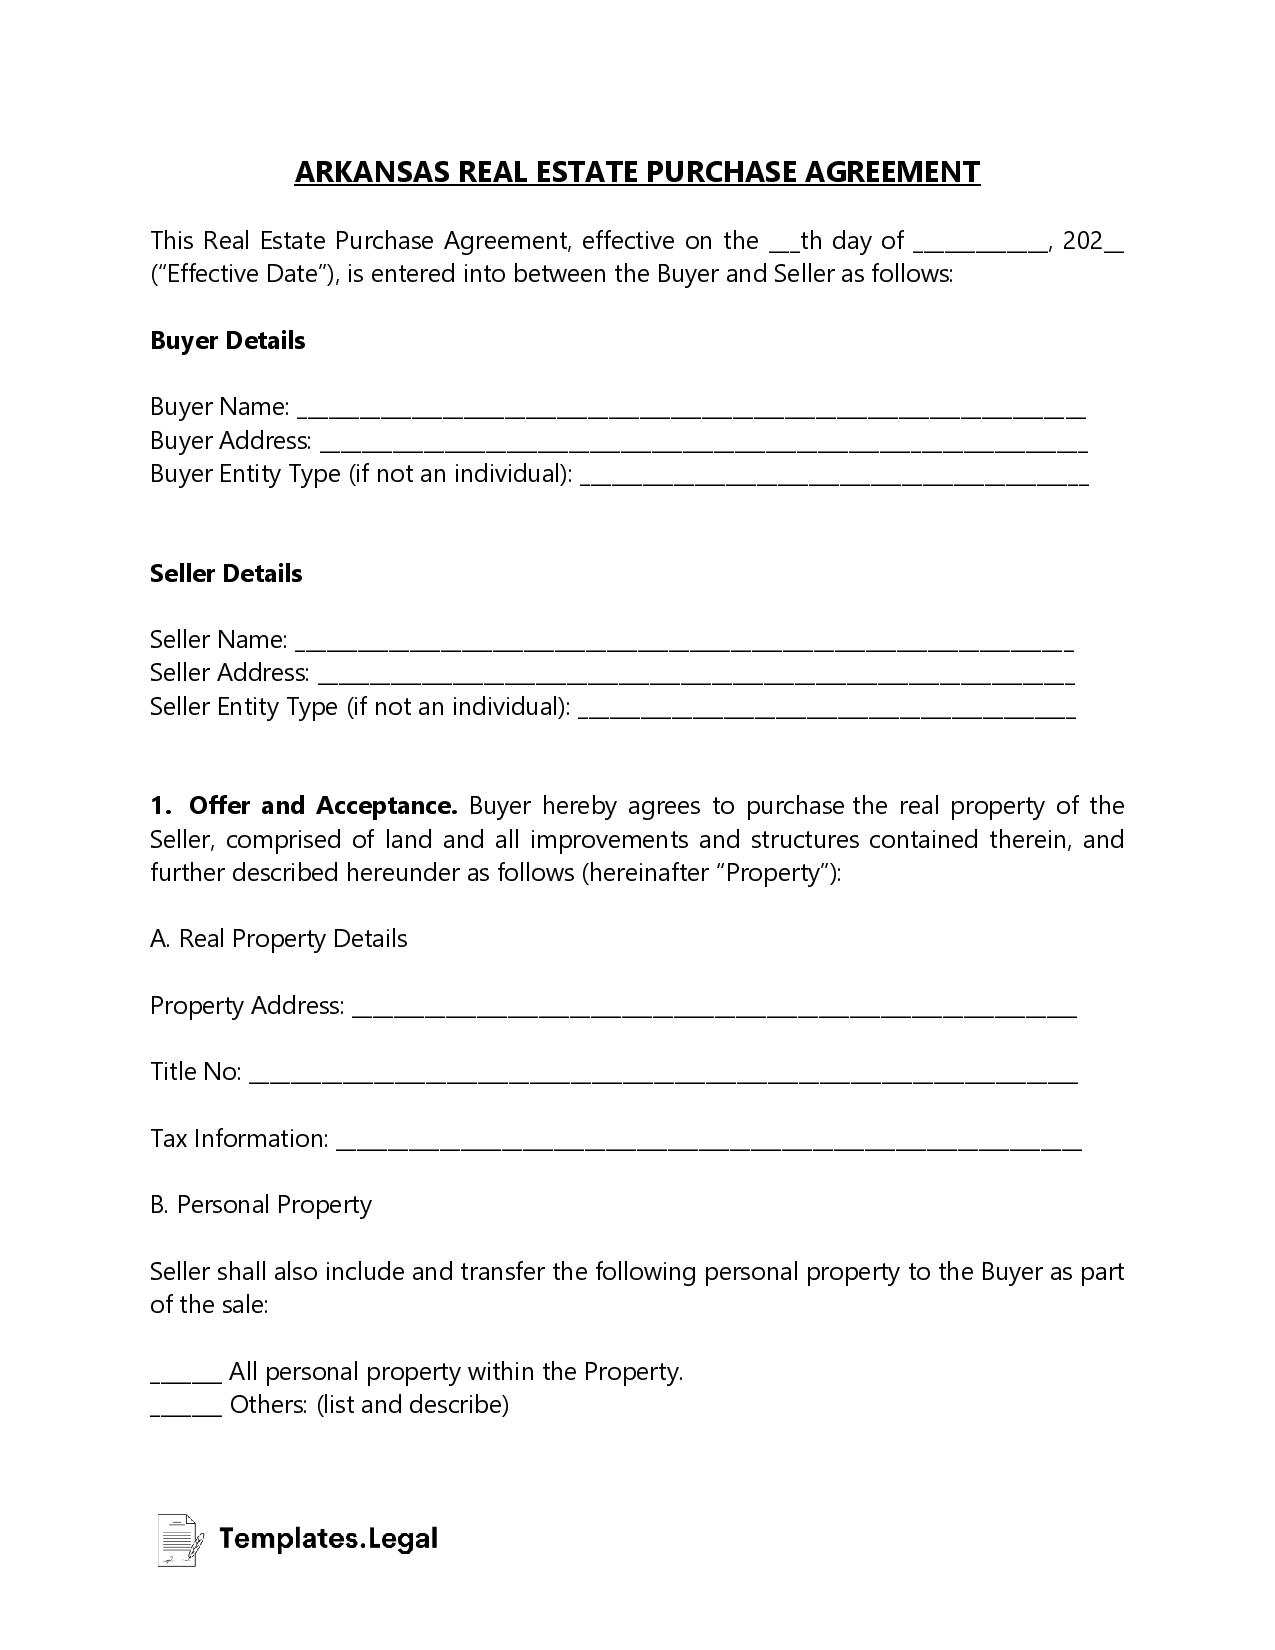 Arkansas Real Estate Purchase Agreement - Templates.Legal